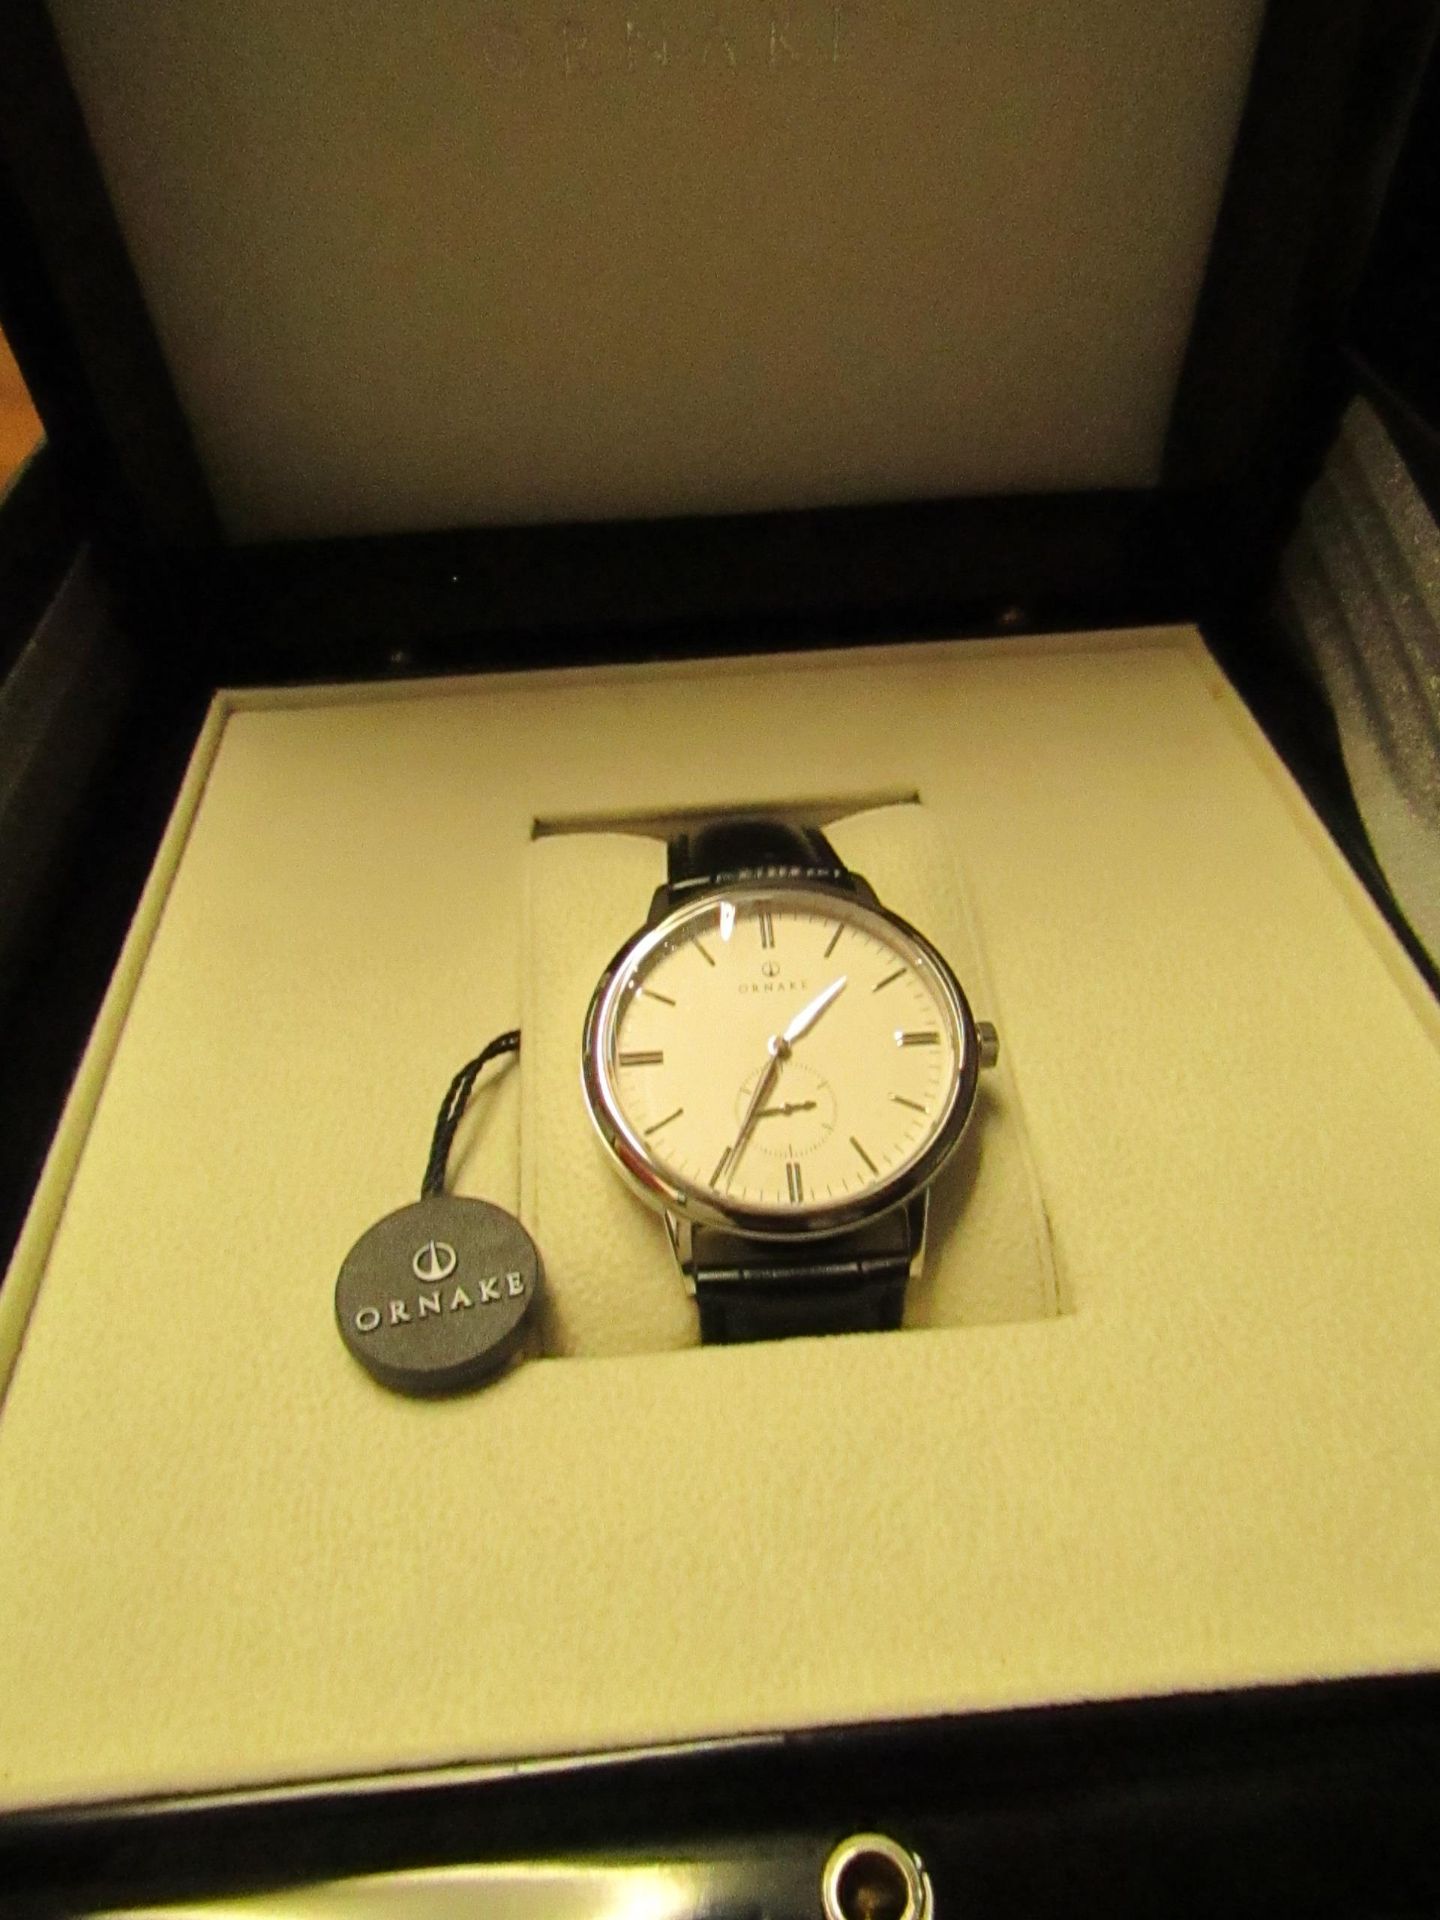 Ornake watch, miyota movement, white and silver with black leather strap, new, Boxed and ticking.